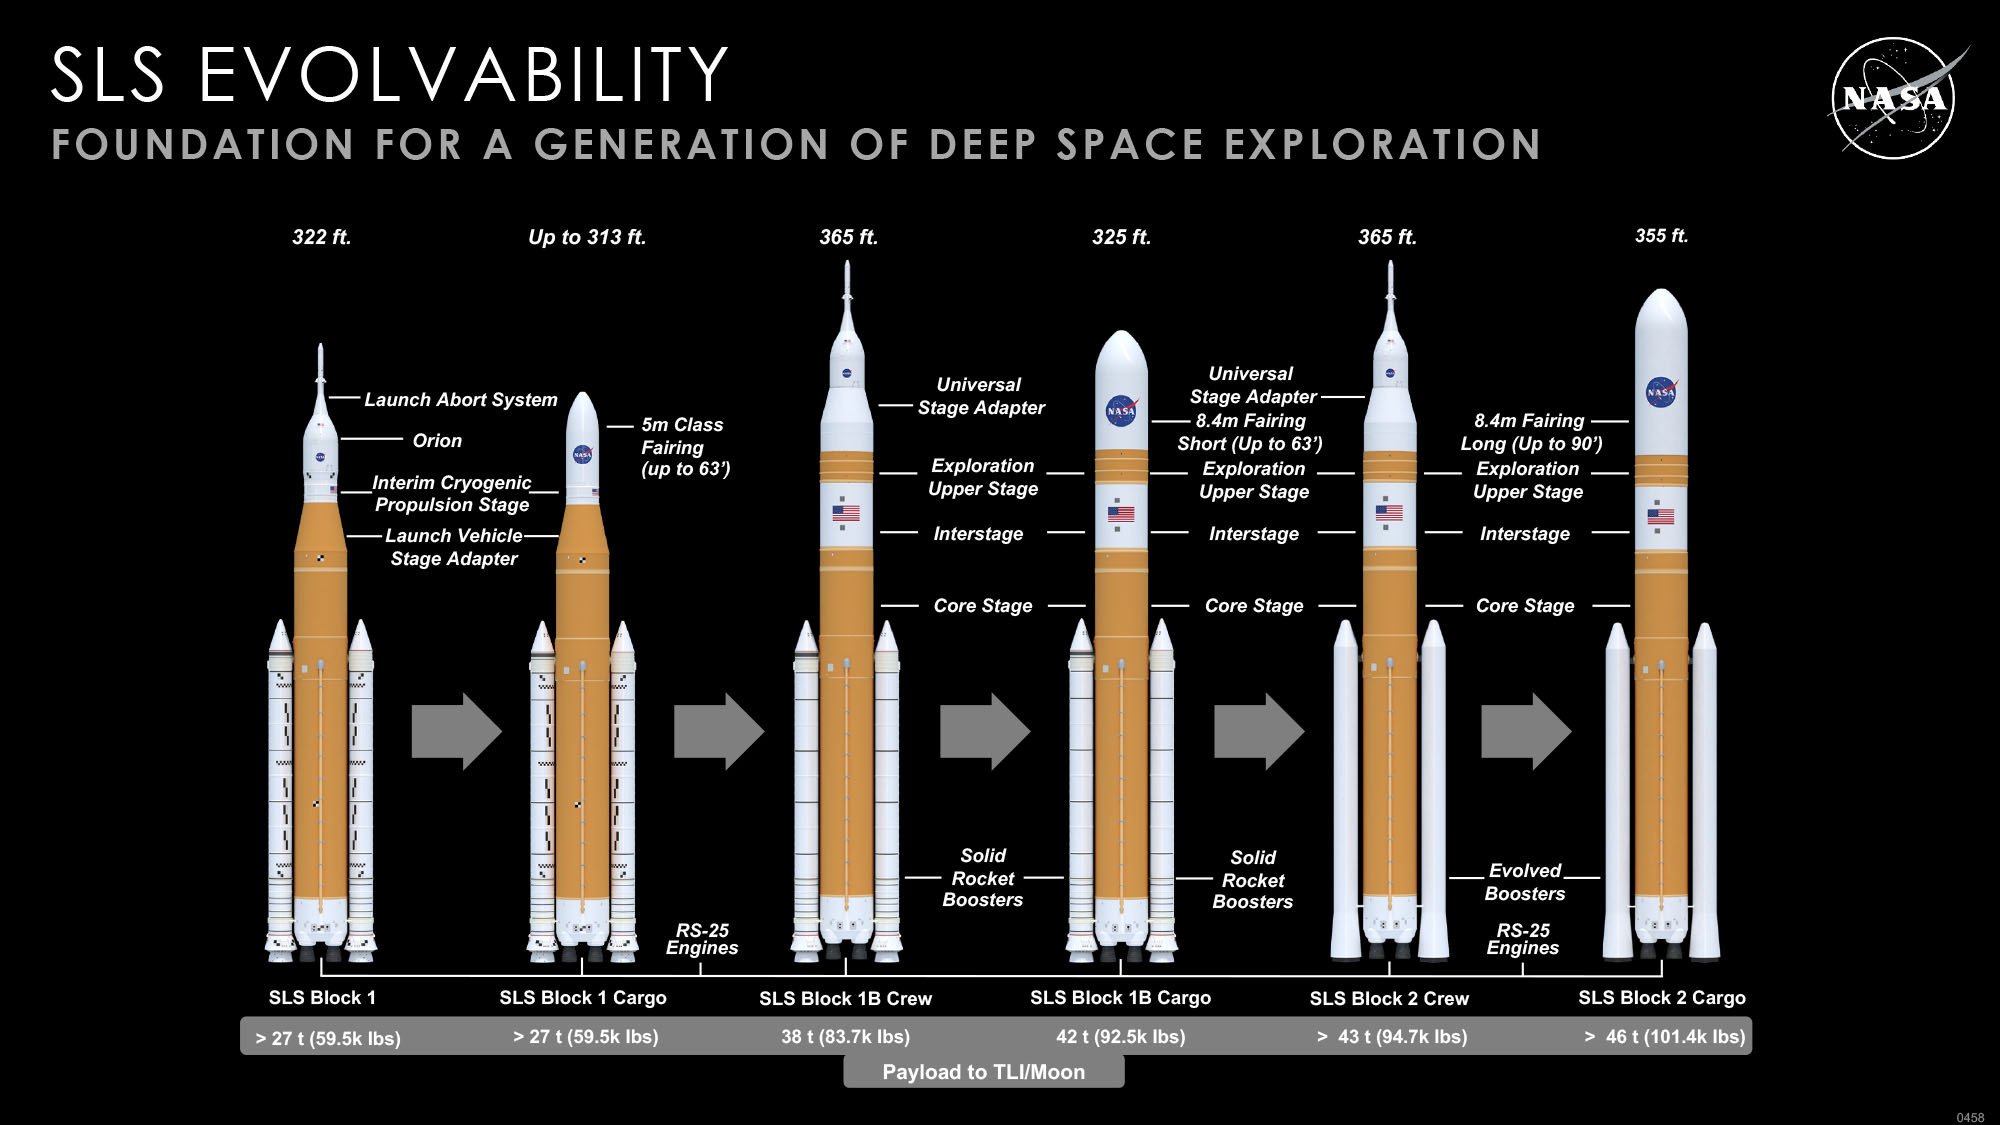 comparision of different SLS rocket types